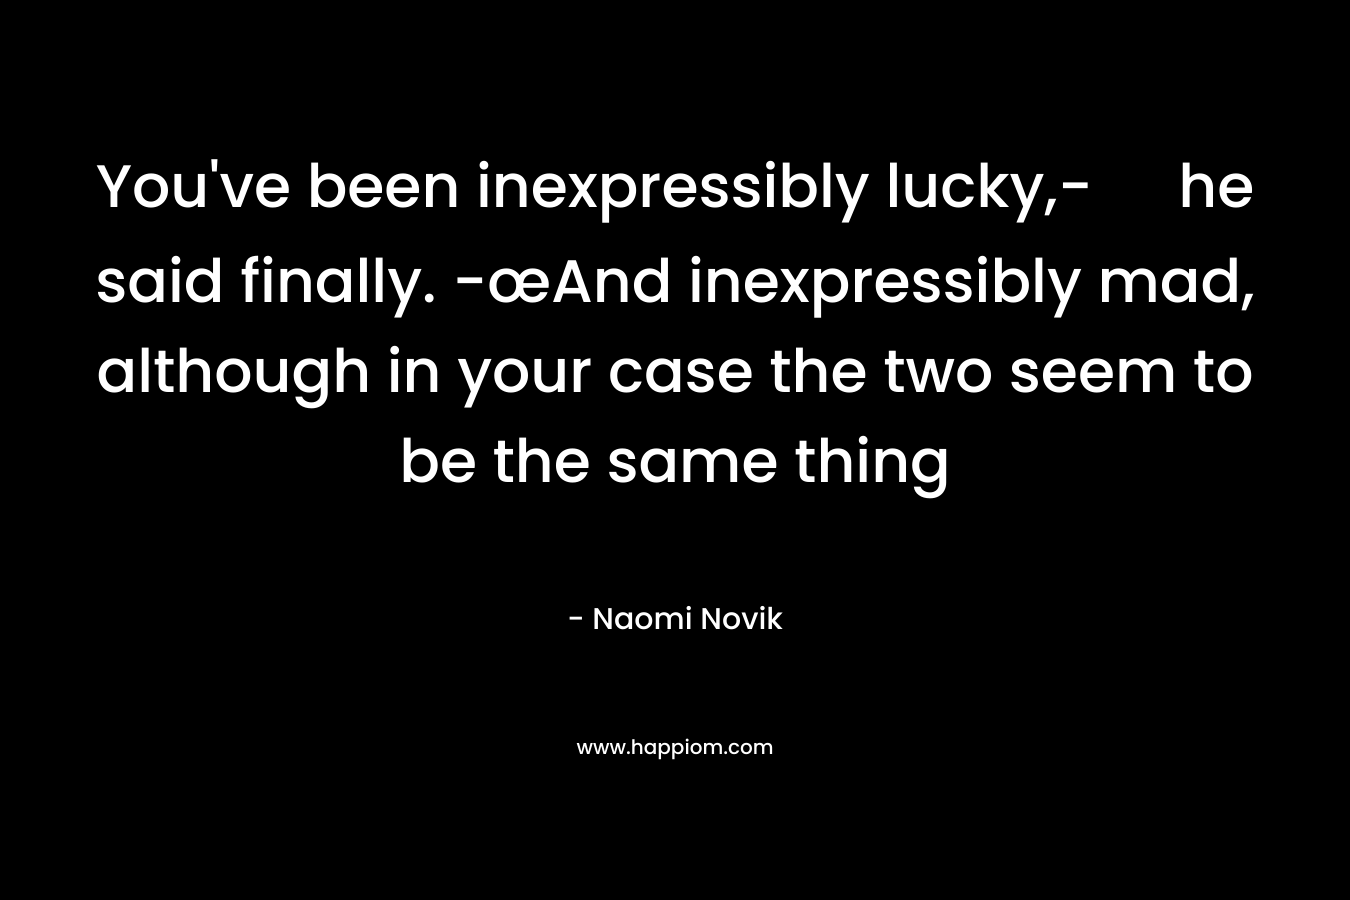 You’ve been inexpressibly lucky,- he said finally. -œAnd inexpressibly mad, although in your case the two seem to be the same thing – Naomi Novik